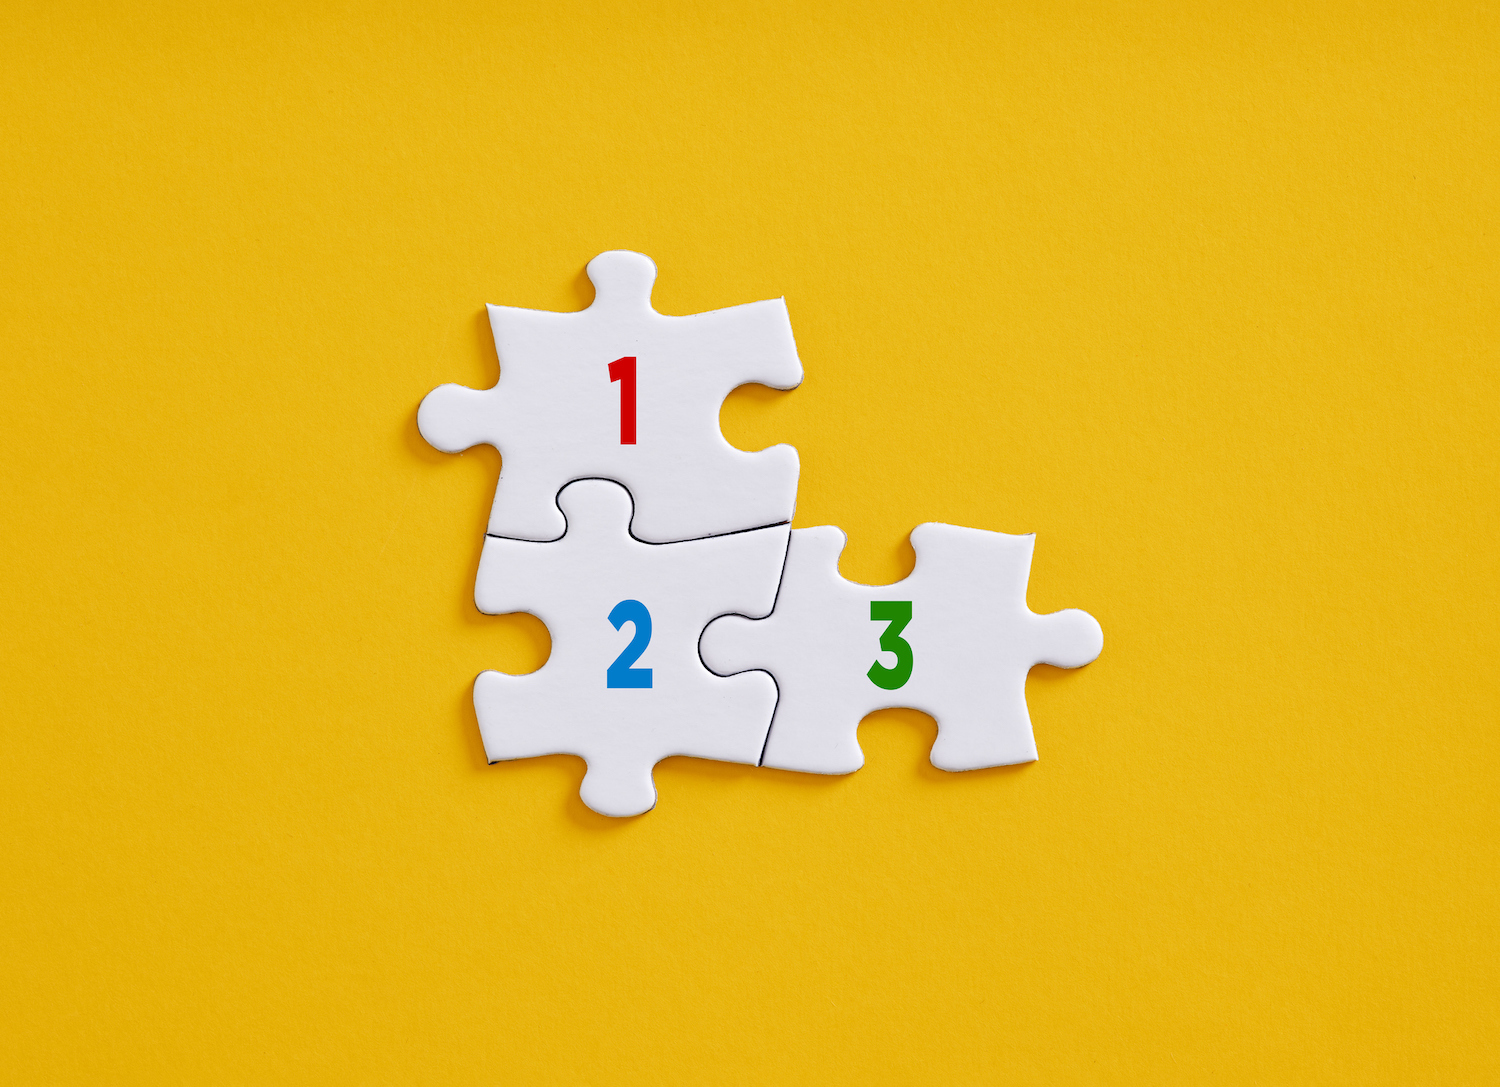 Numbers 1 2 3 on connected jigsaw puzzle pieces. 3 tips for crypto startups preparing for continued compliance